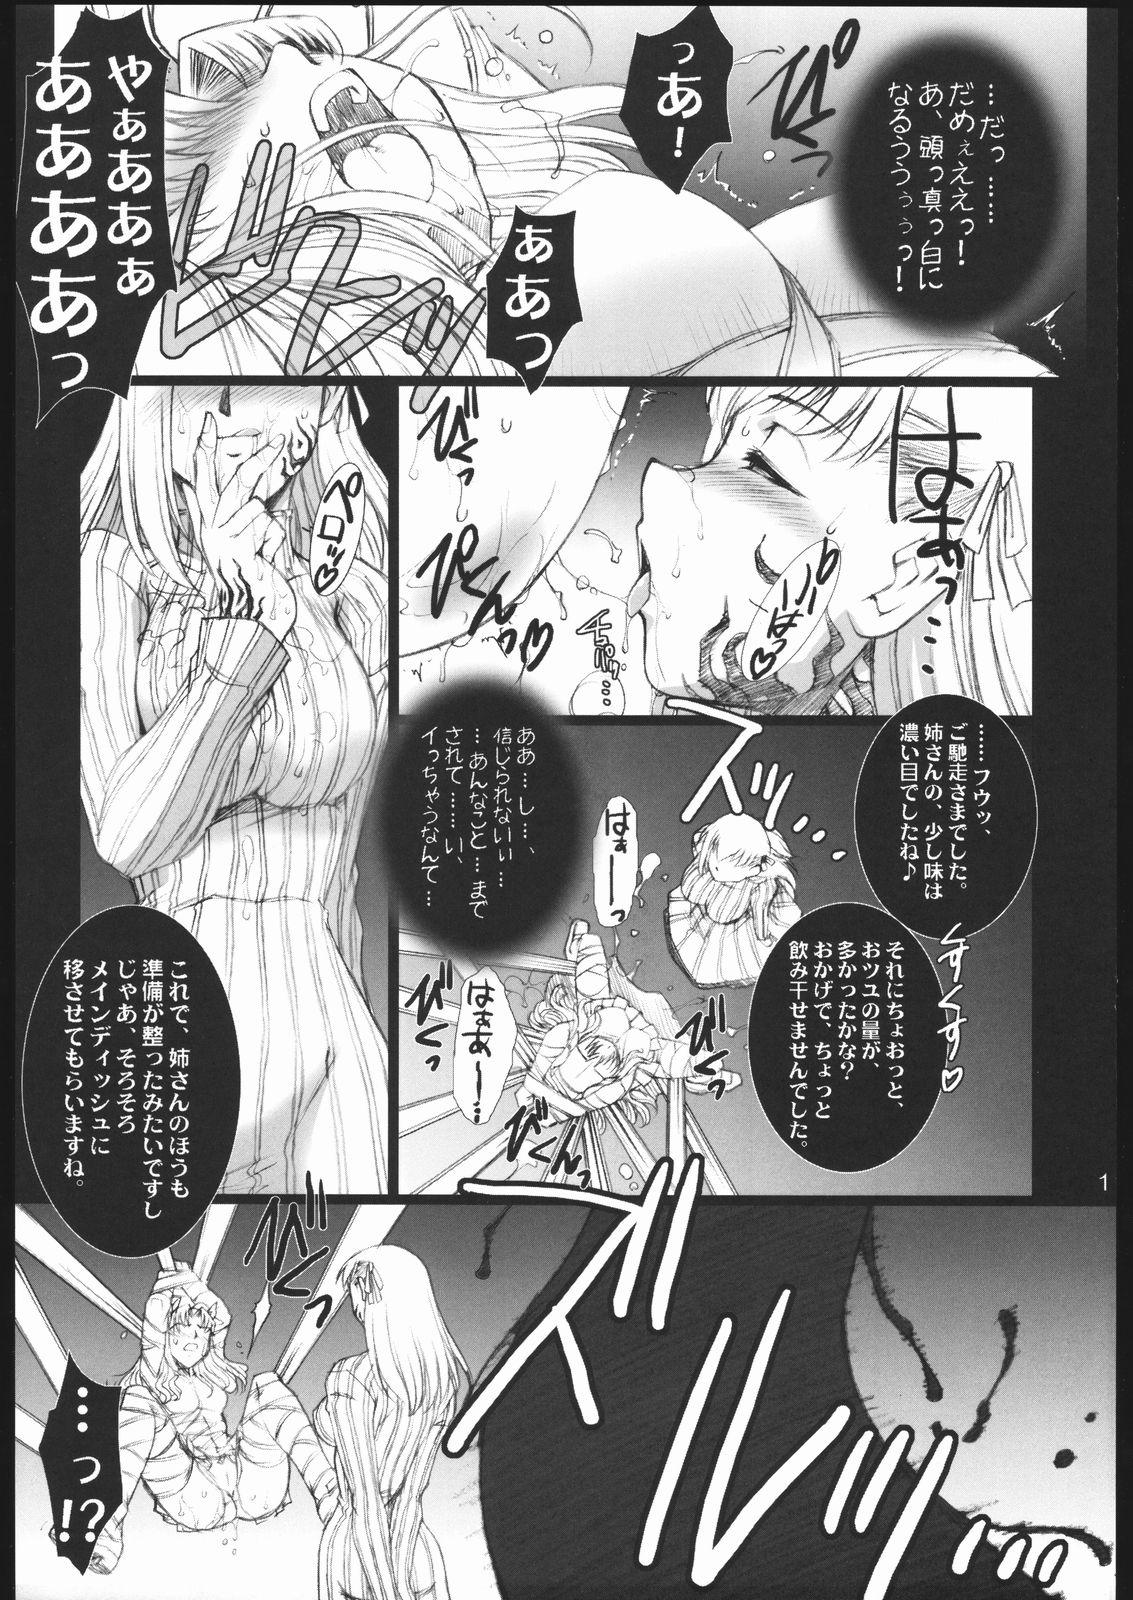 Sloppy Blowjob Red Degeneration - Fate stay night Sexcam - Page 10